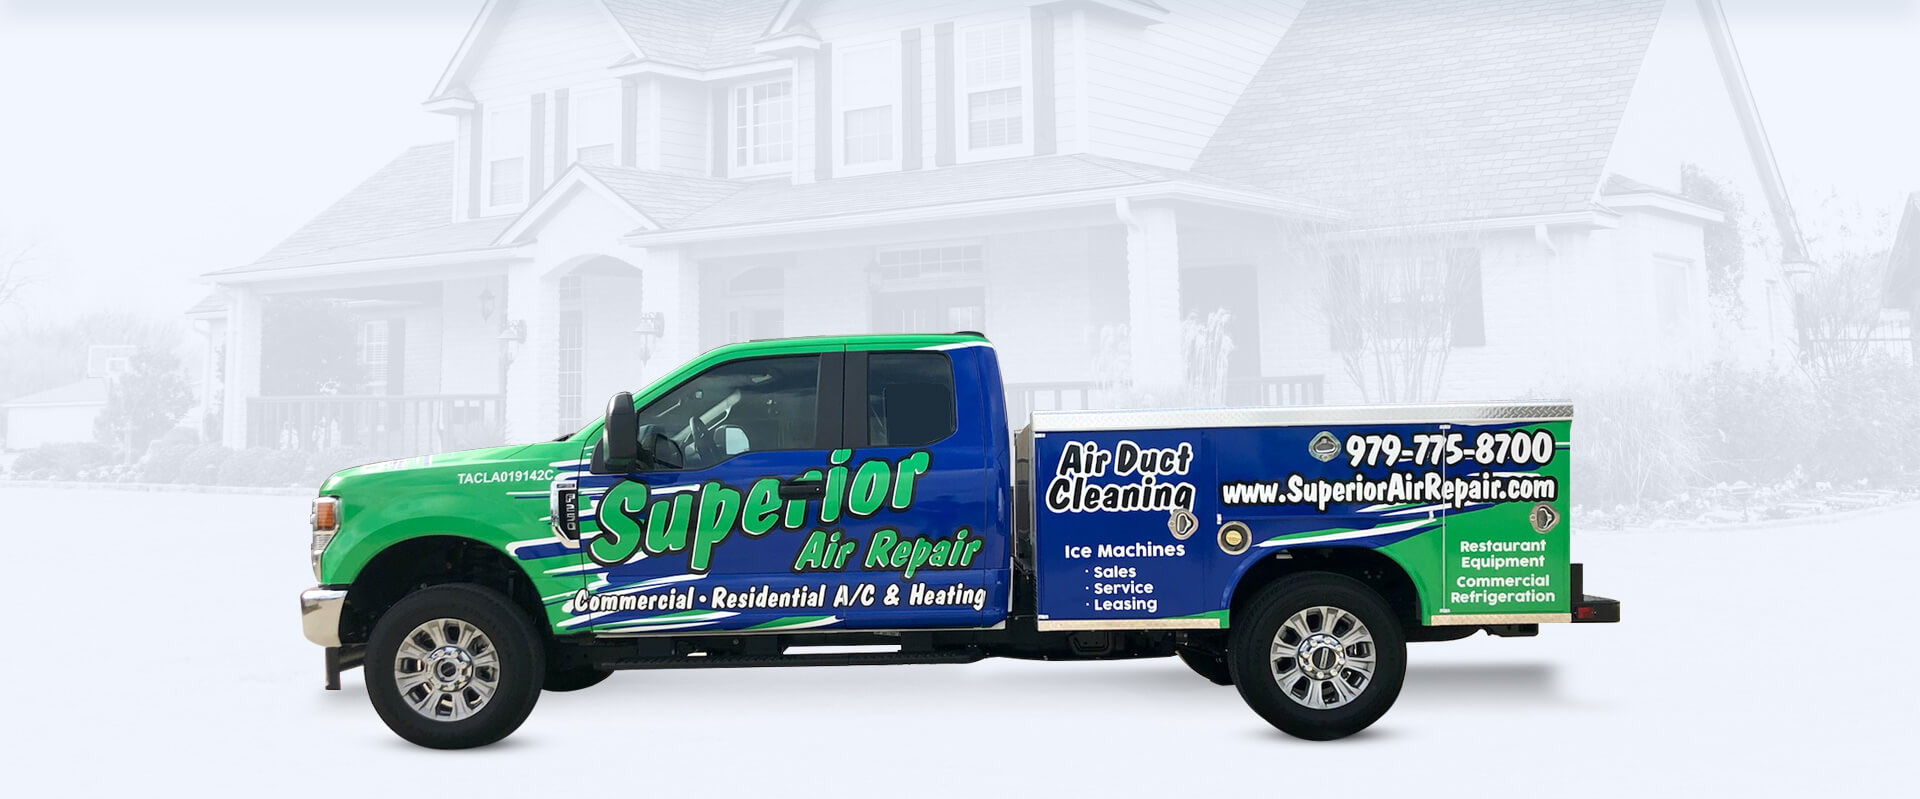 A truck with the words " super-ior air repair & cleaning " on it.